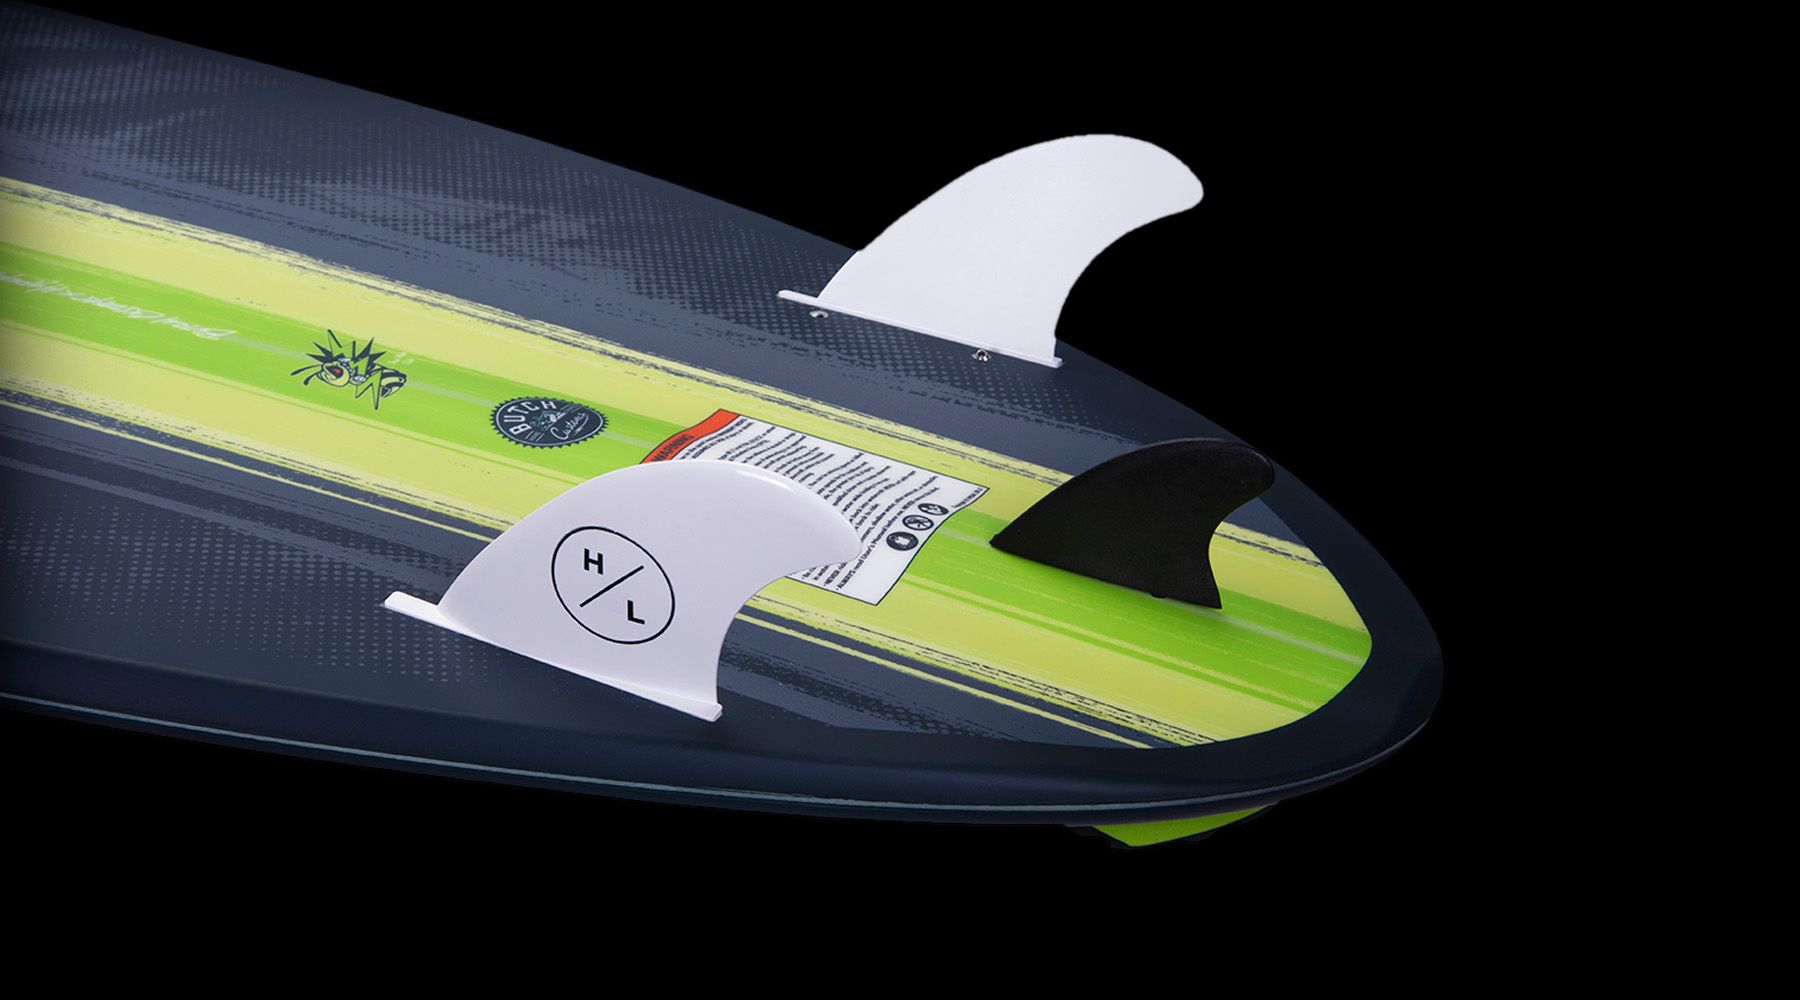 A Hyperlite 2023 Buzz Wakesurf Board with DuraShell construction and fins attached to it.